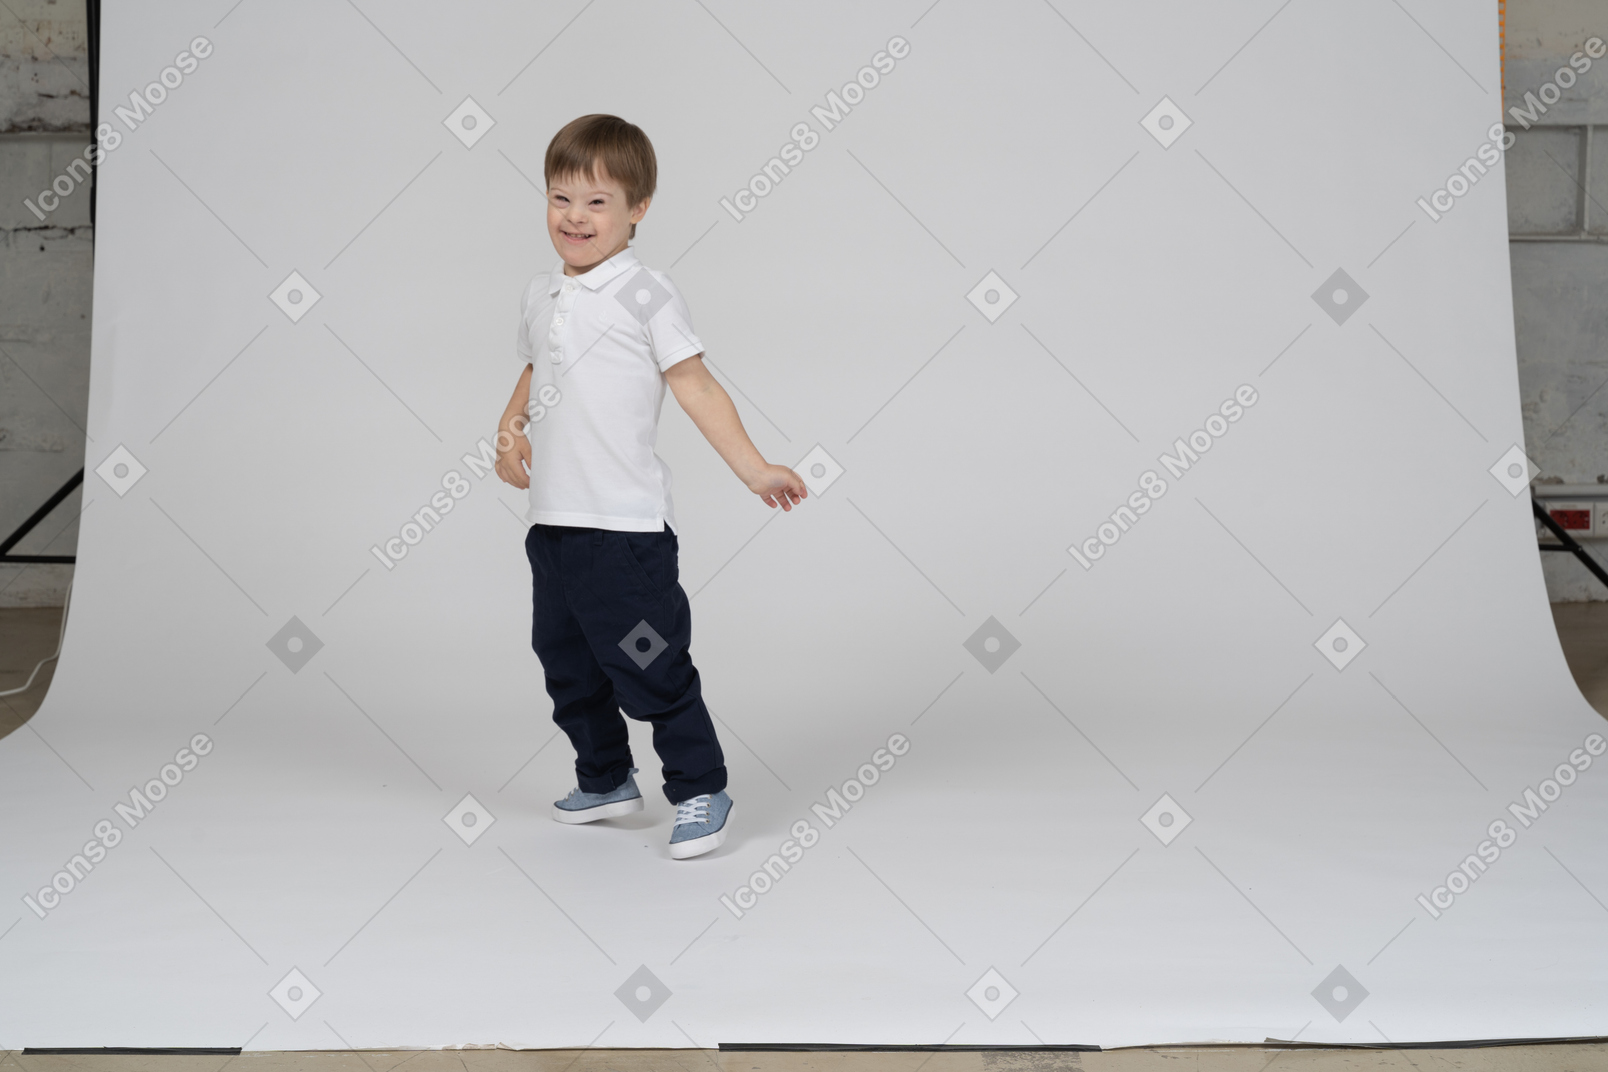 Happy boy standing and stretching his arms